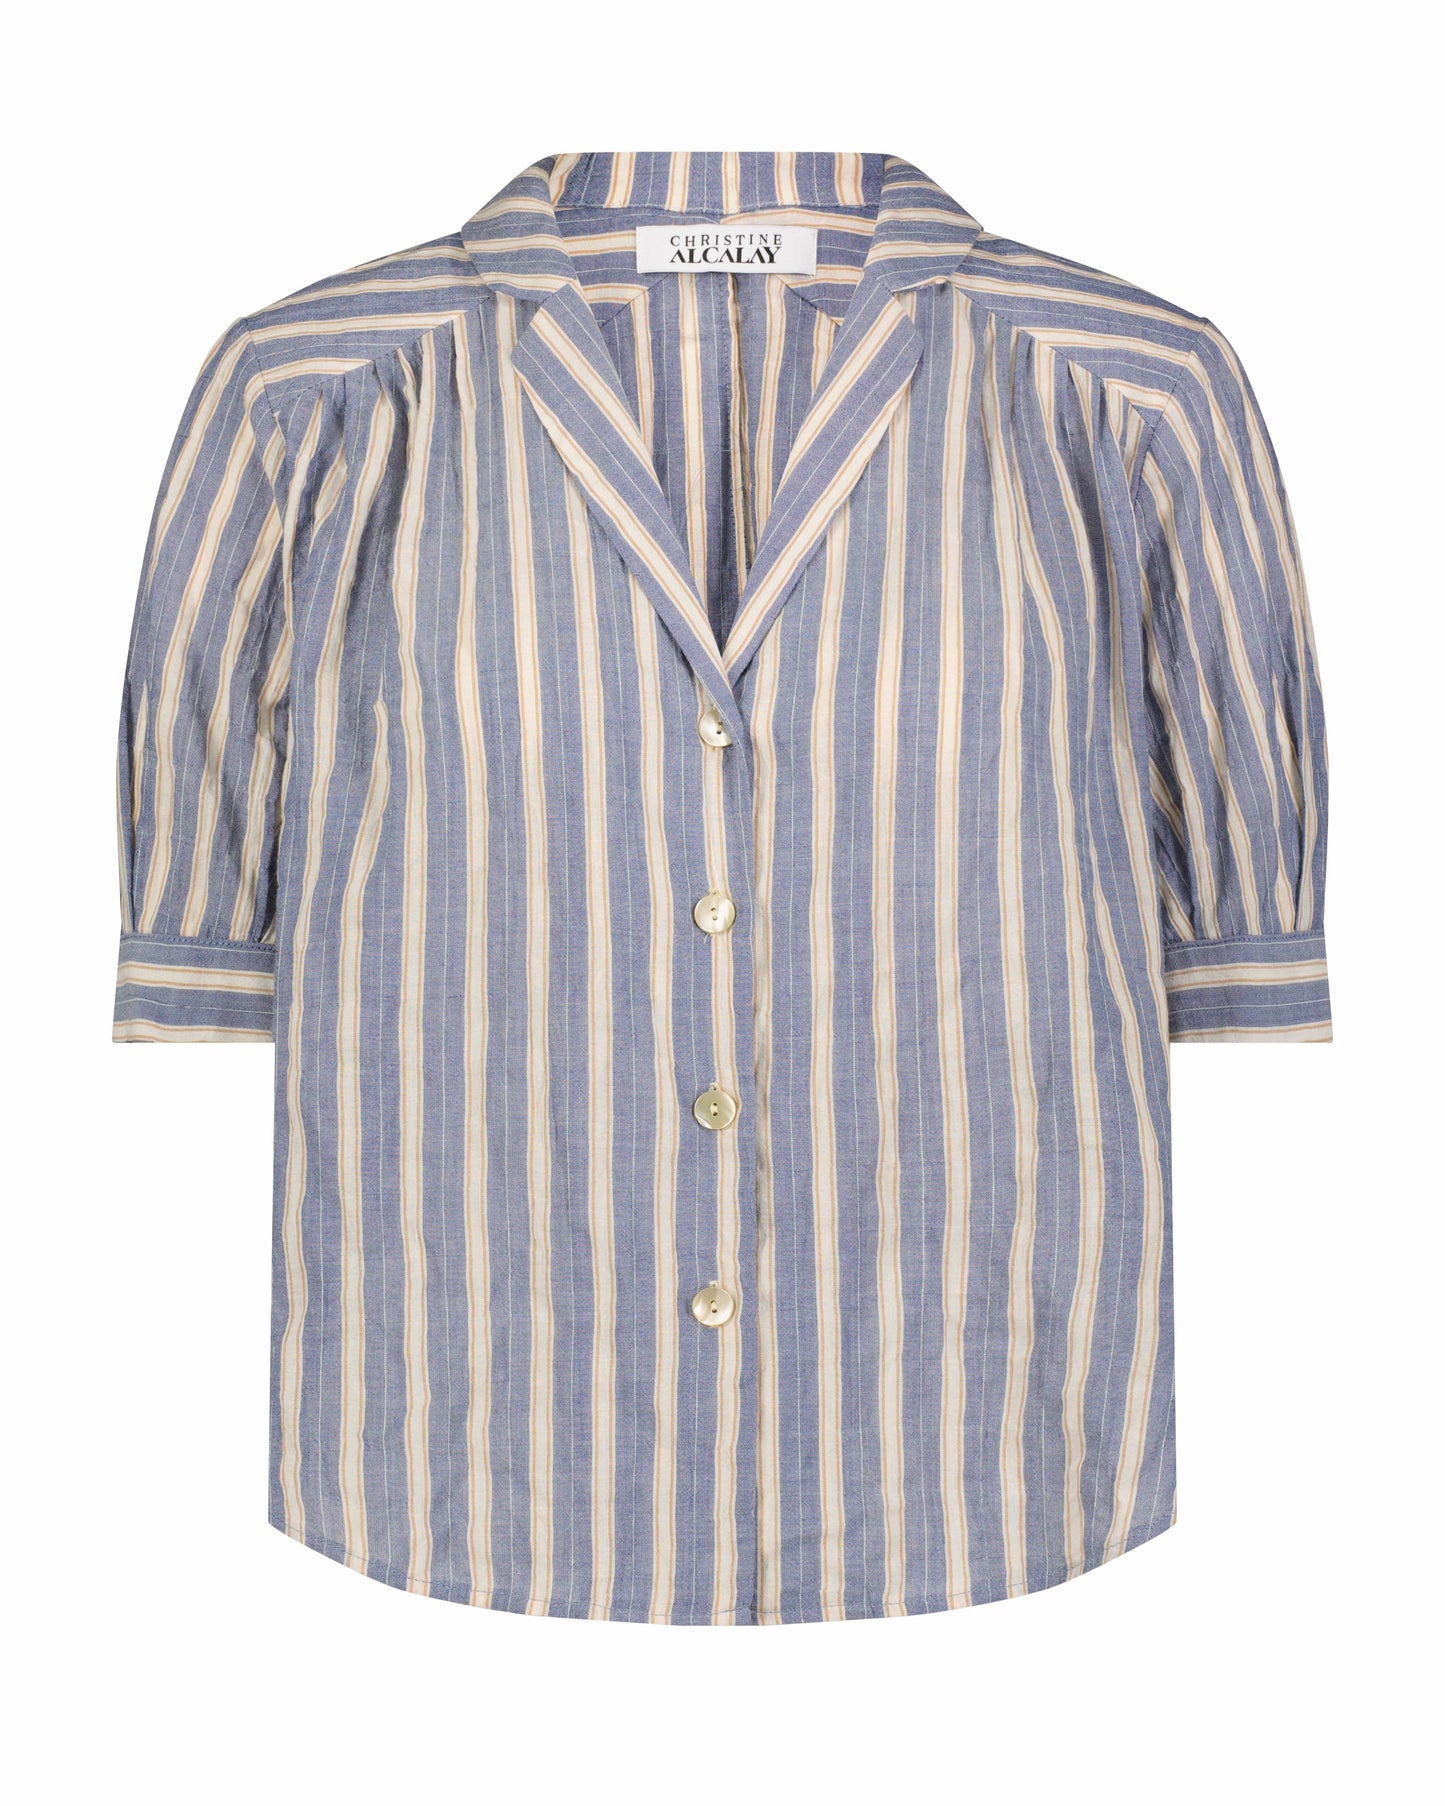 Katherine Blouse in Striped Cotton Tops CHRISTINE ALCALAY   